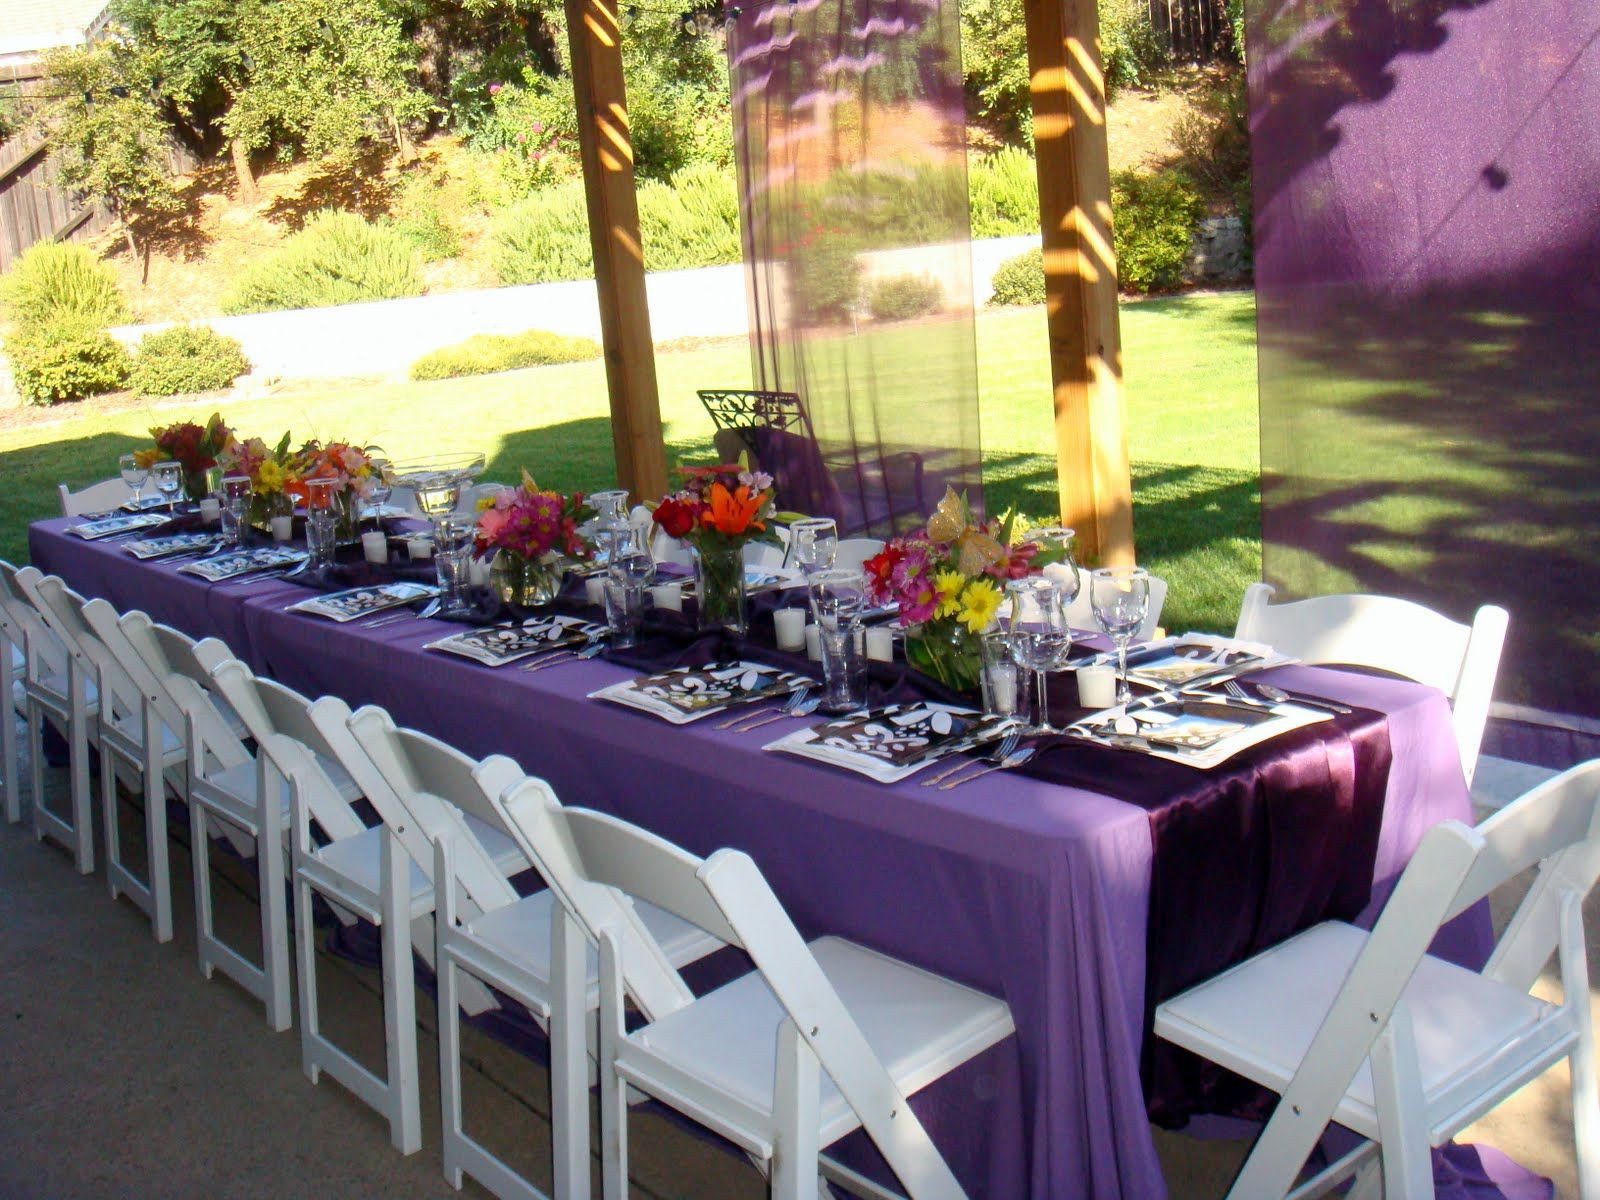 Graduation Party Ideas Backyard
 tablescapes for outdoor graduation party